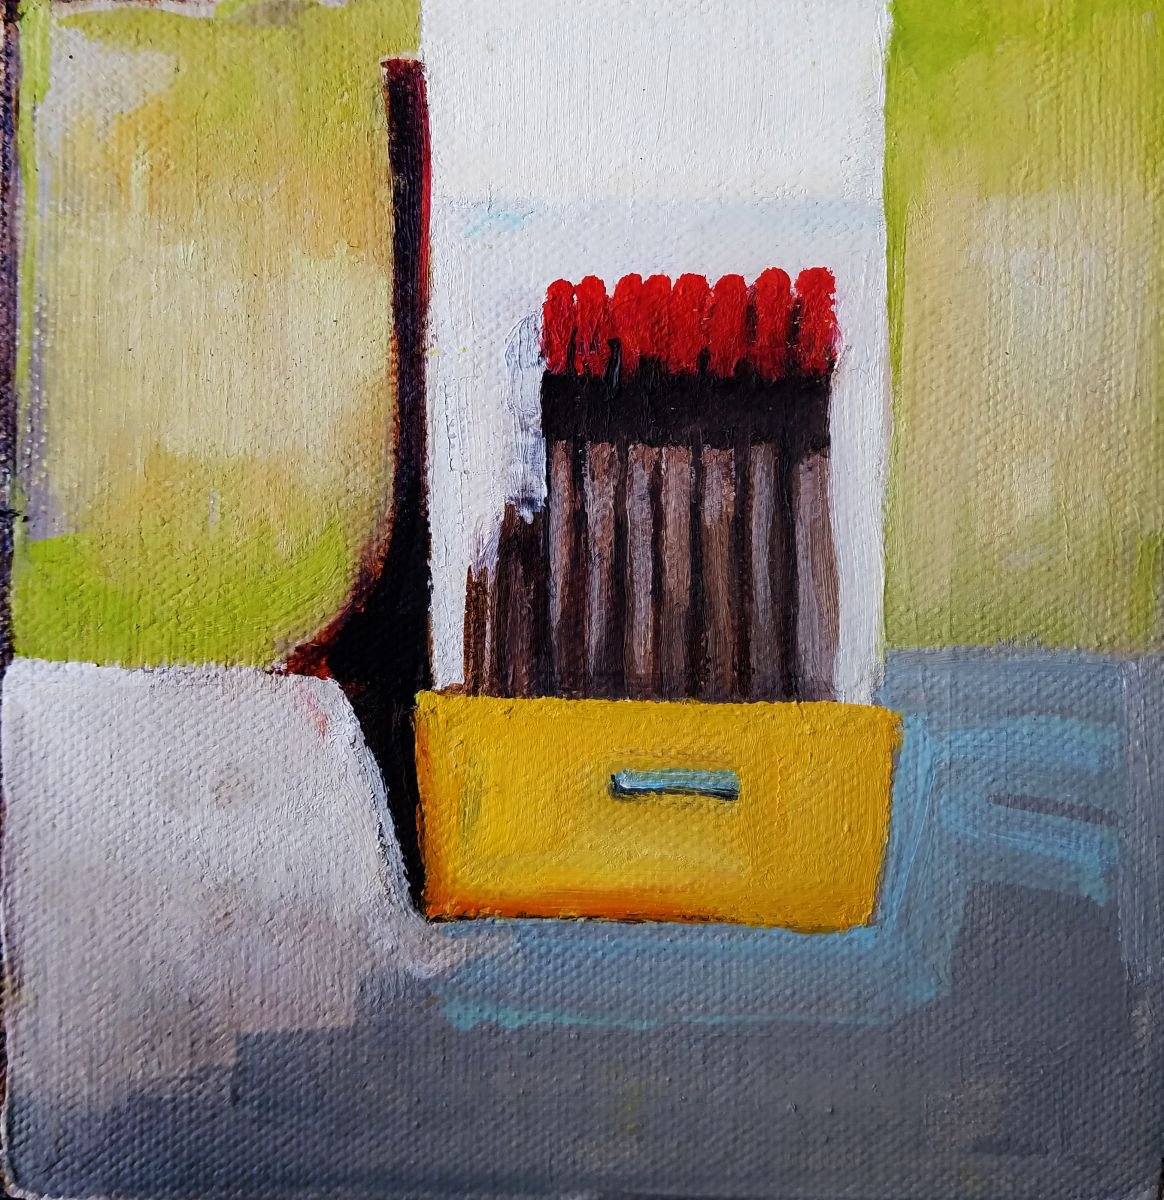 Still Life with Matchbook by Shelton Walsmith